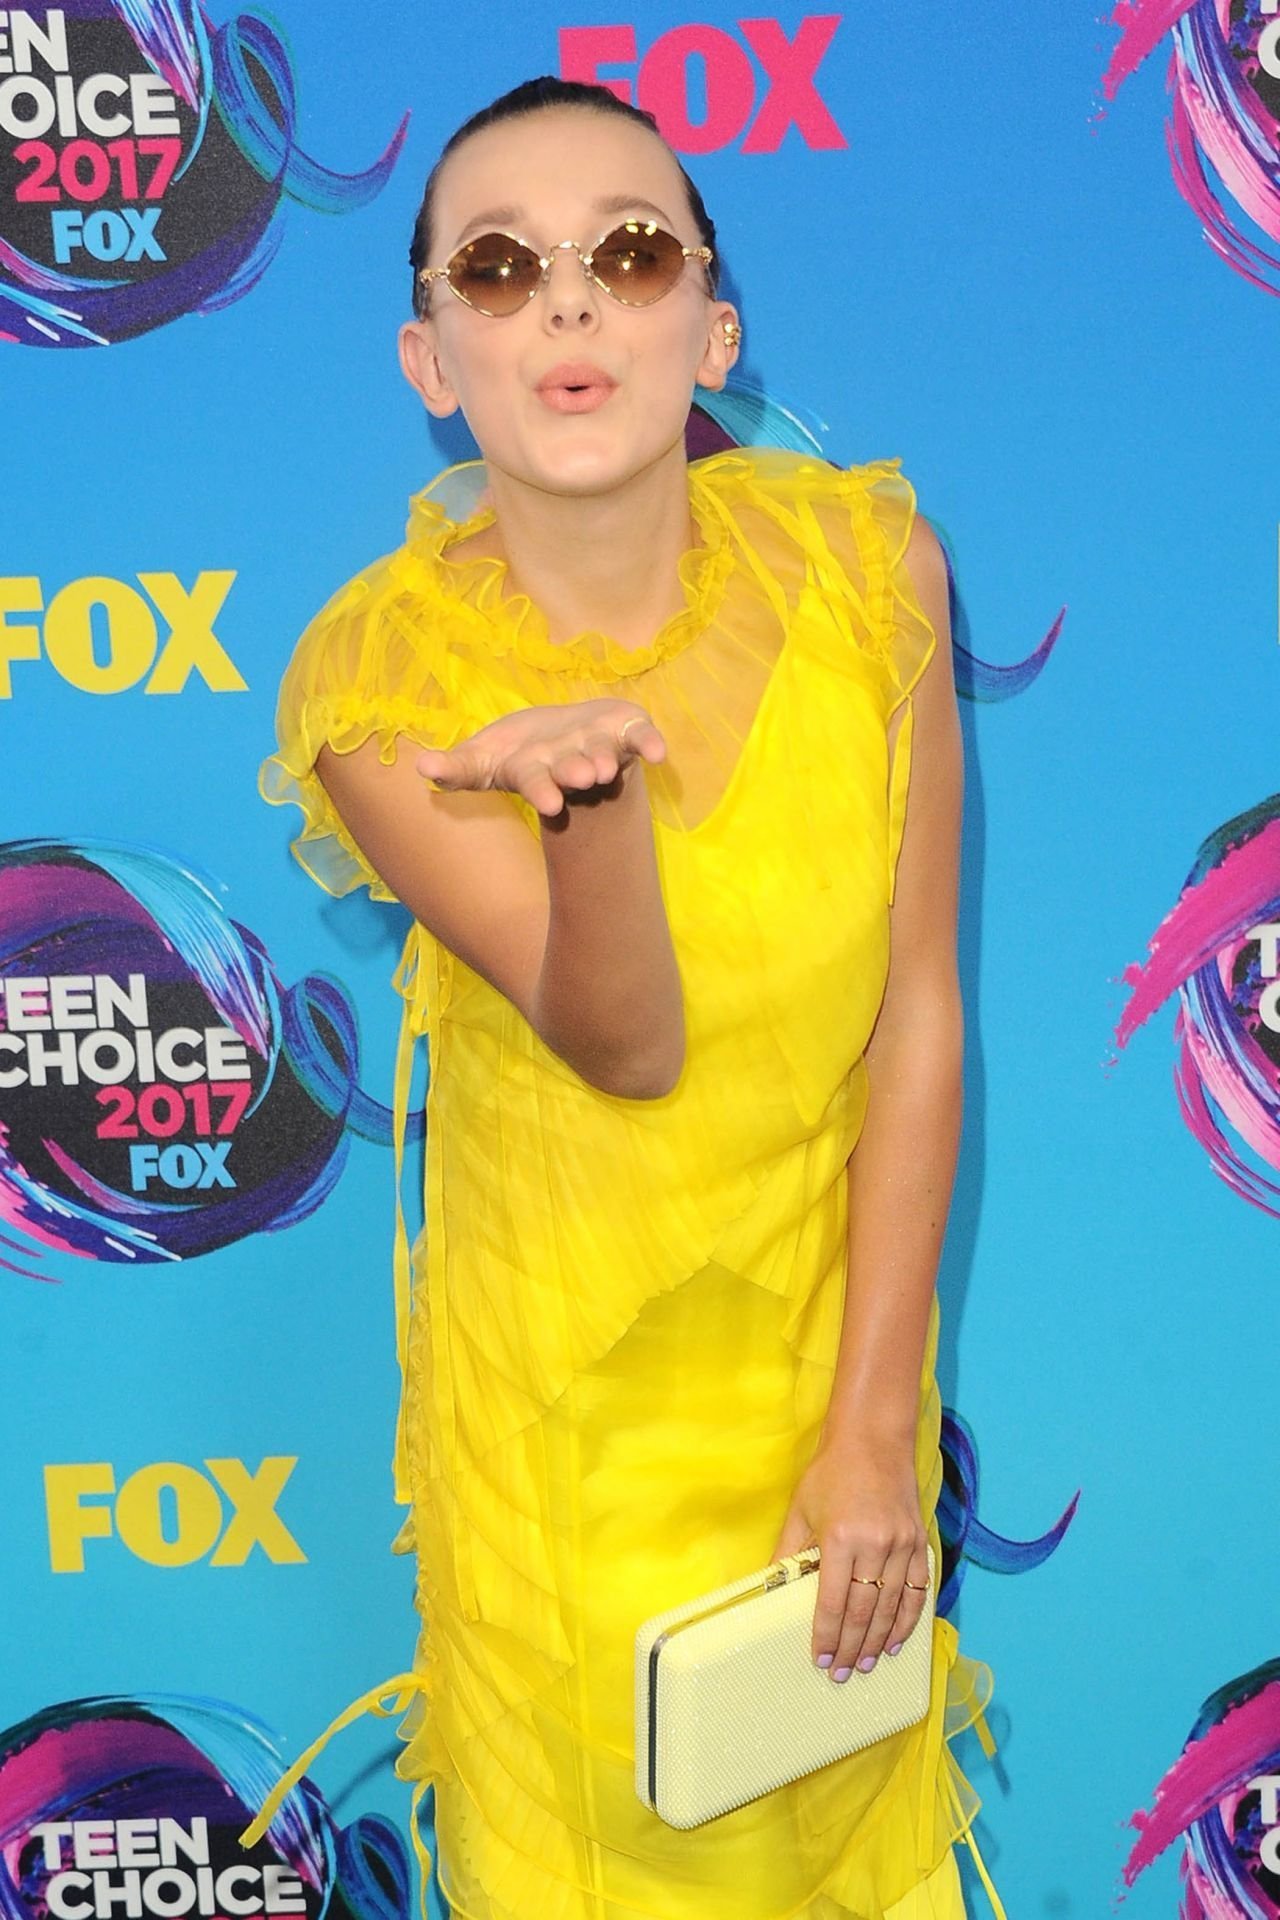 Millie Bobby Brown - Teen Choice 2017 Awards in Los Angeles | Picture 1522937